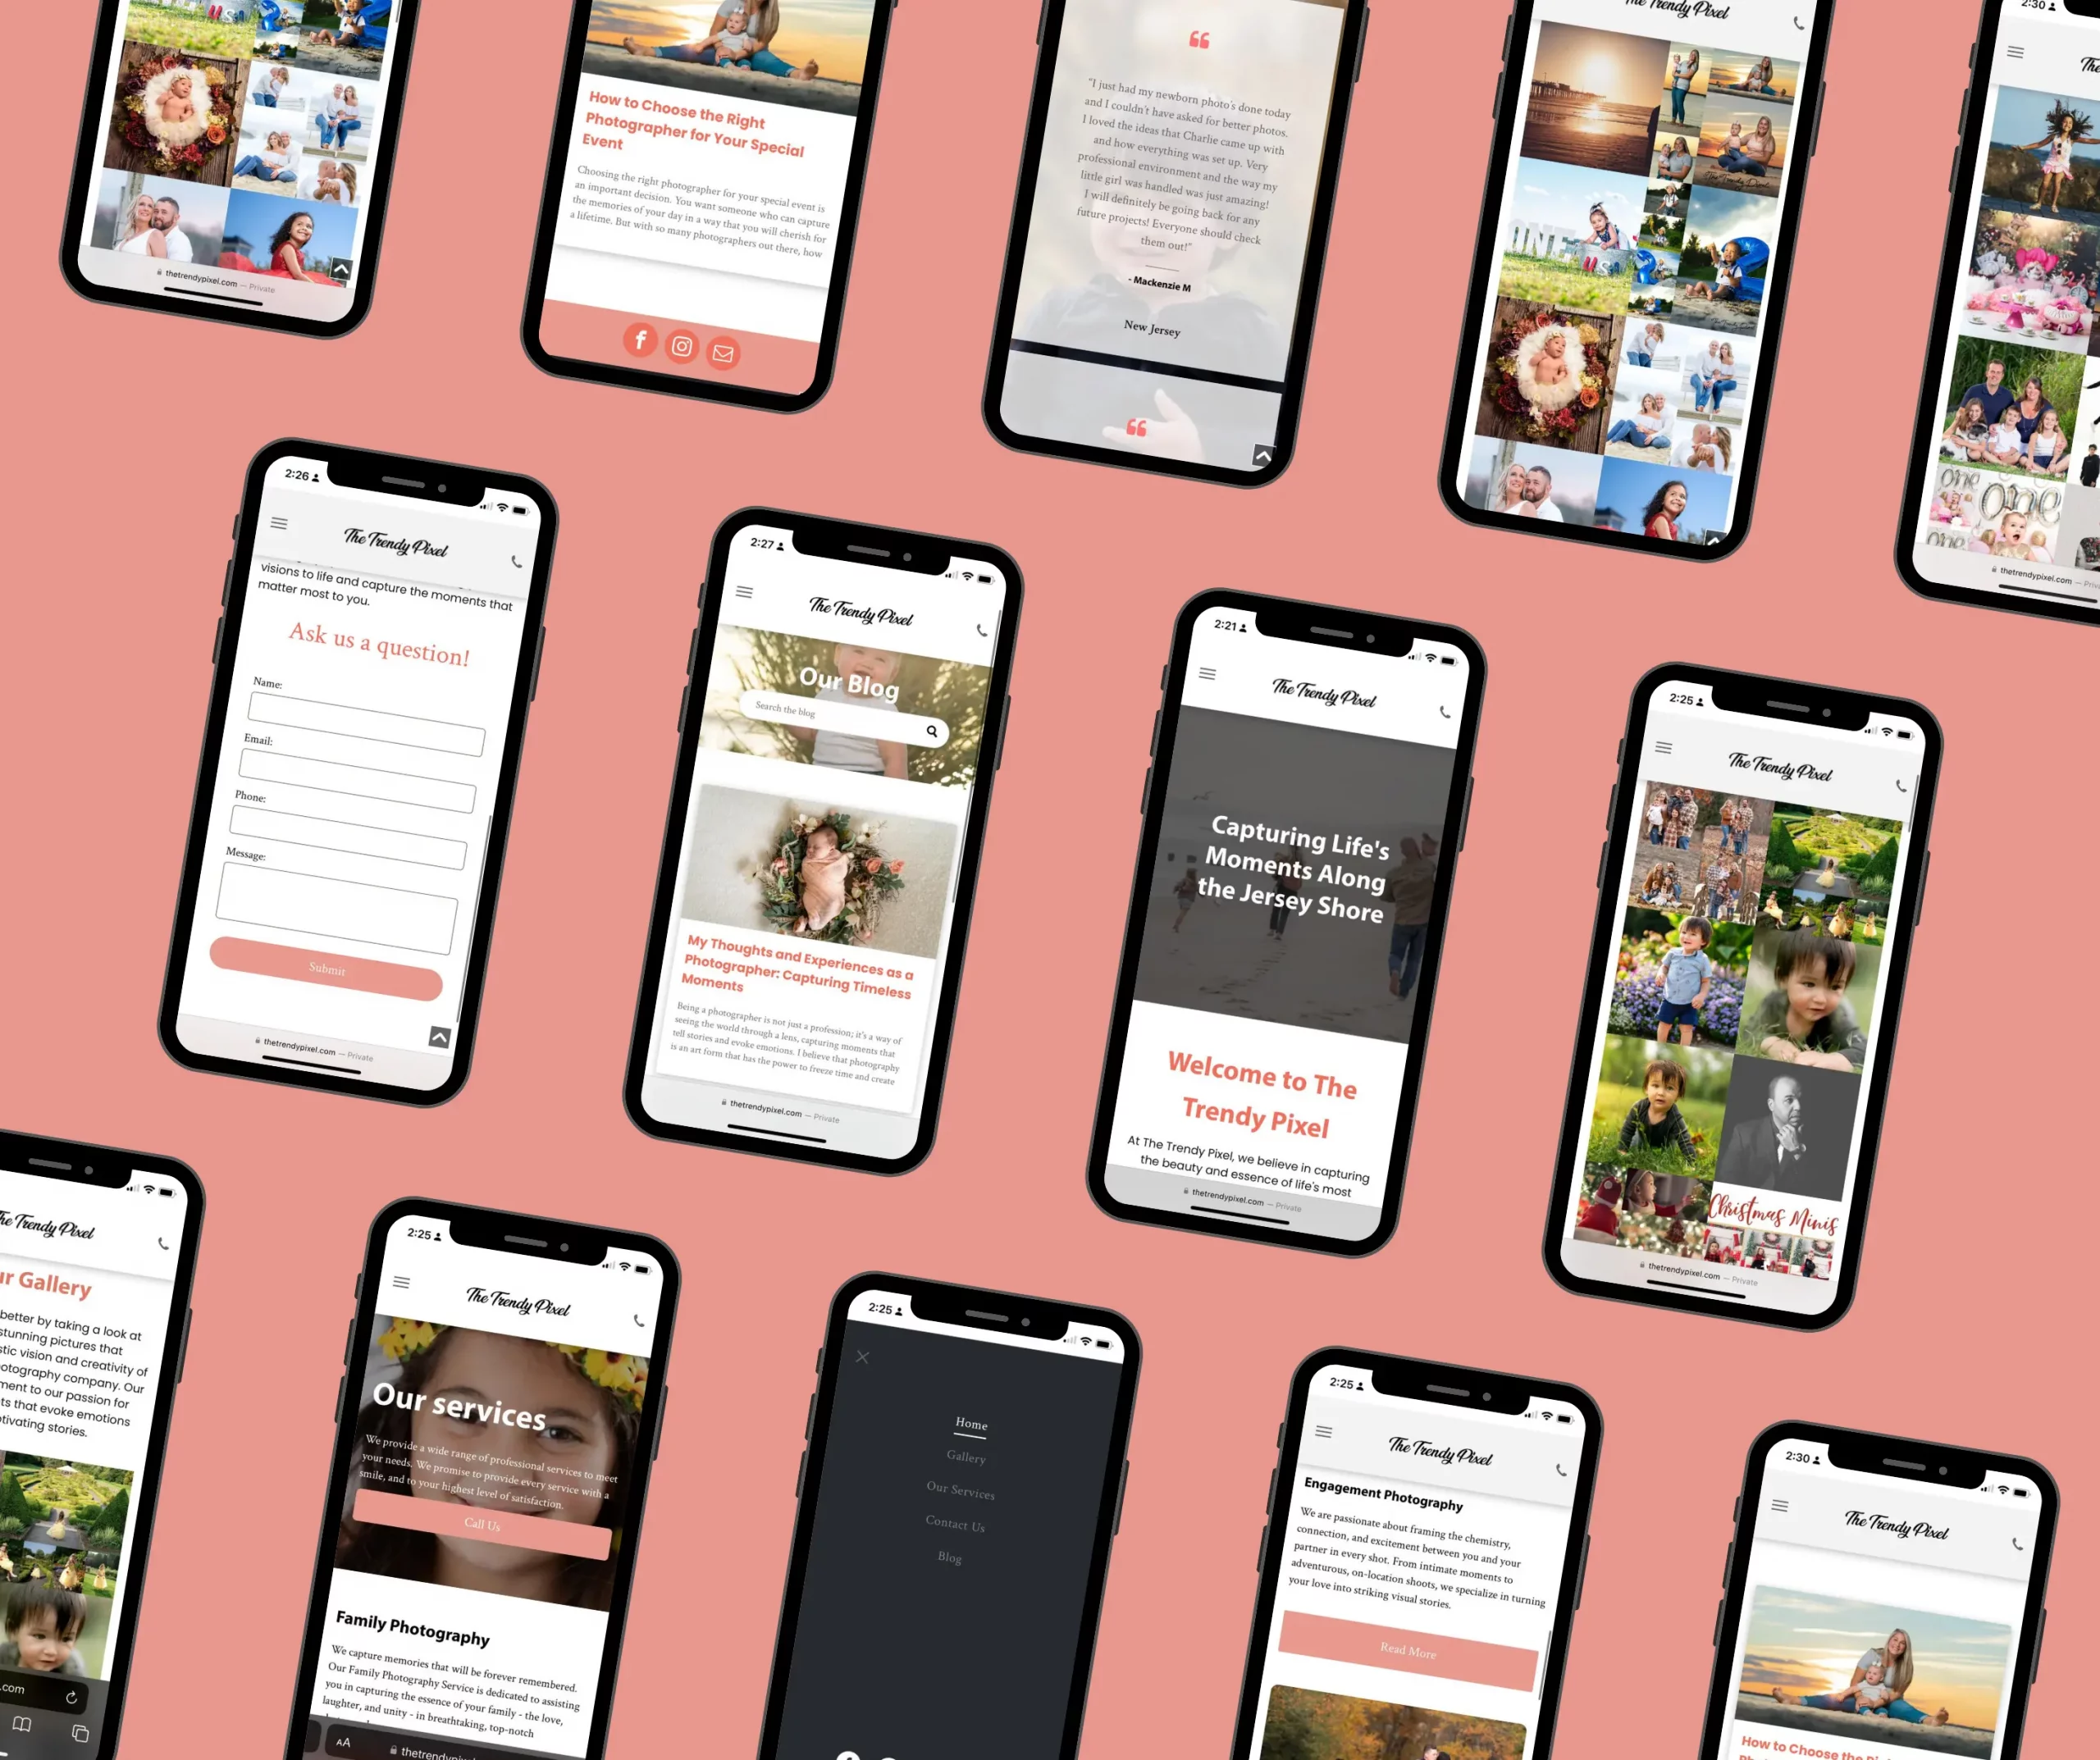 mockup of The Trendy Pixel mobile site, pink